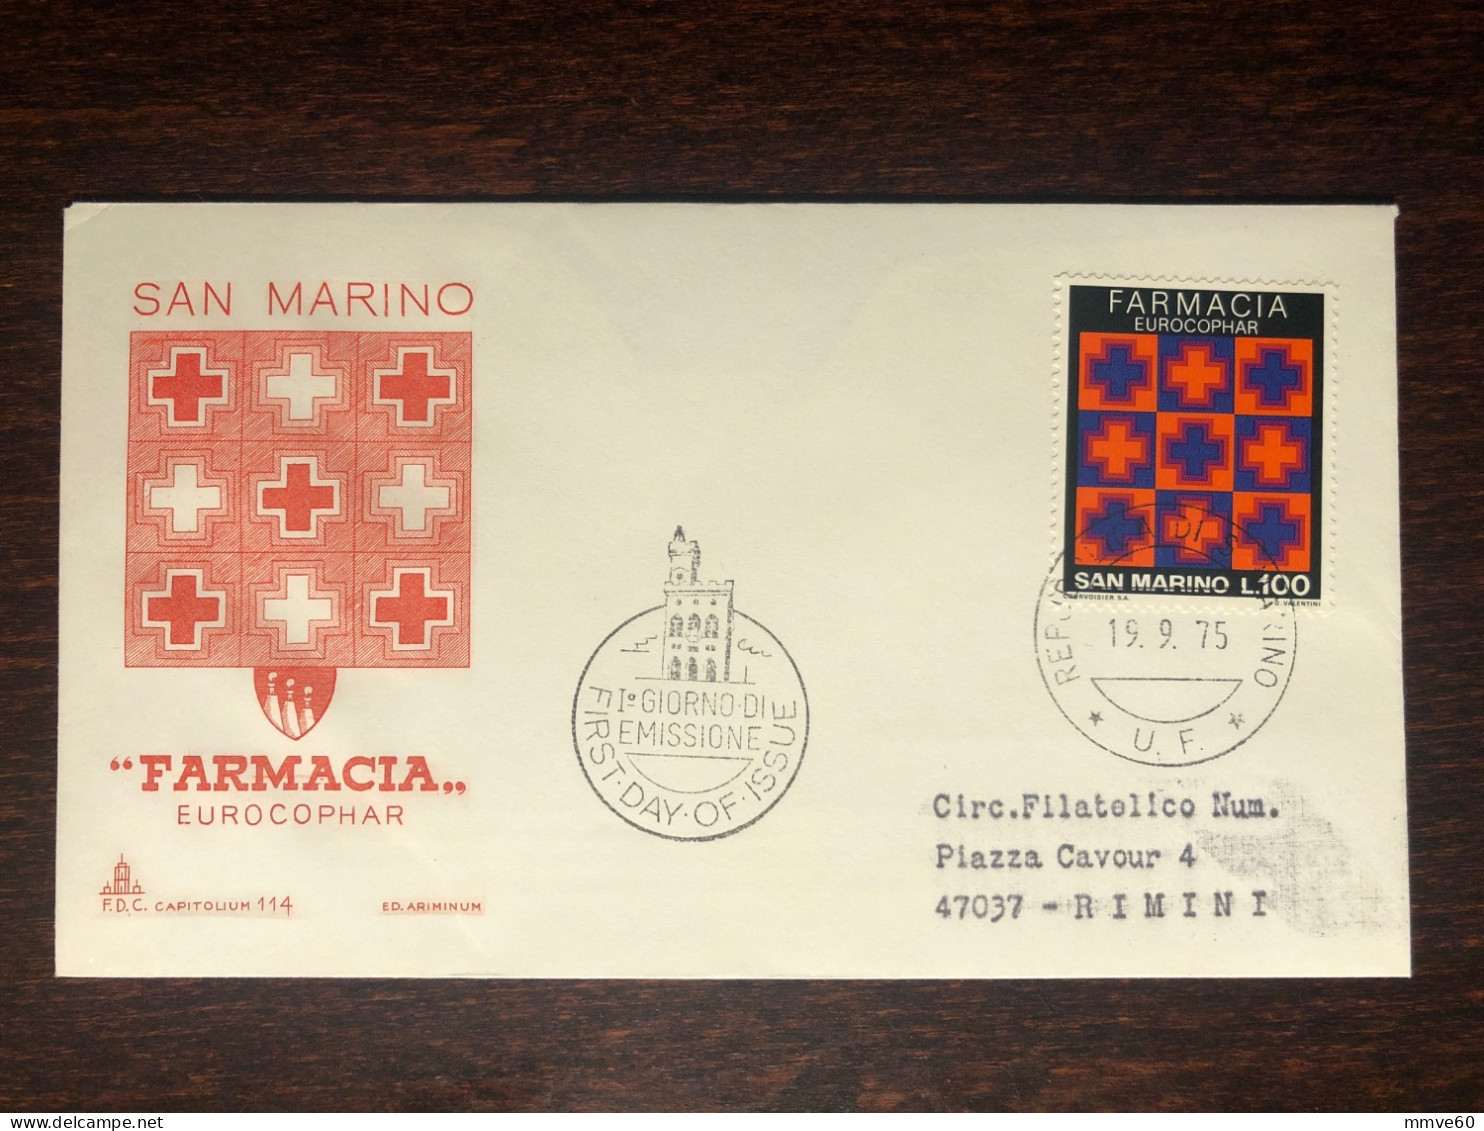 SAN MARINO FDC COVER 1975 YEAR PHARMACY PHARMACOLOGY HEALTH MEDICINE STAMPS - FDC